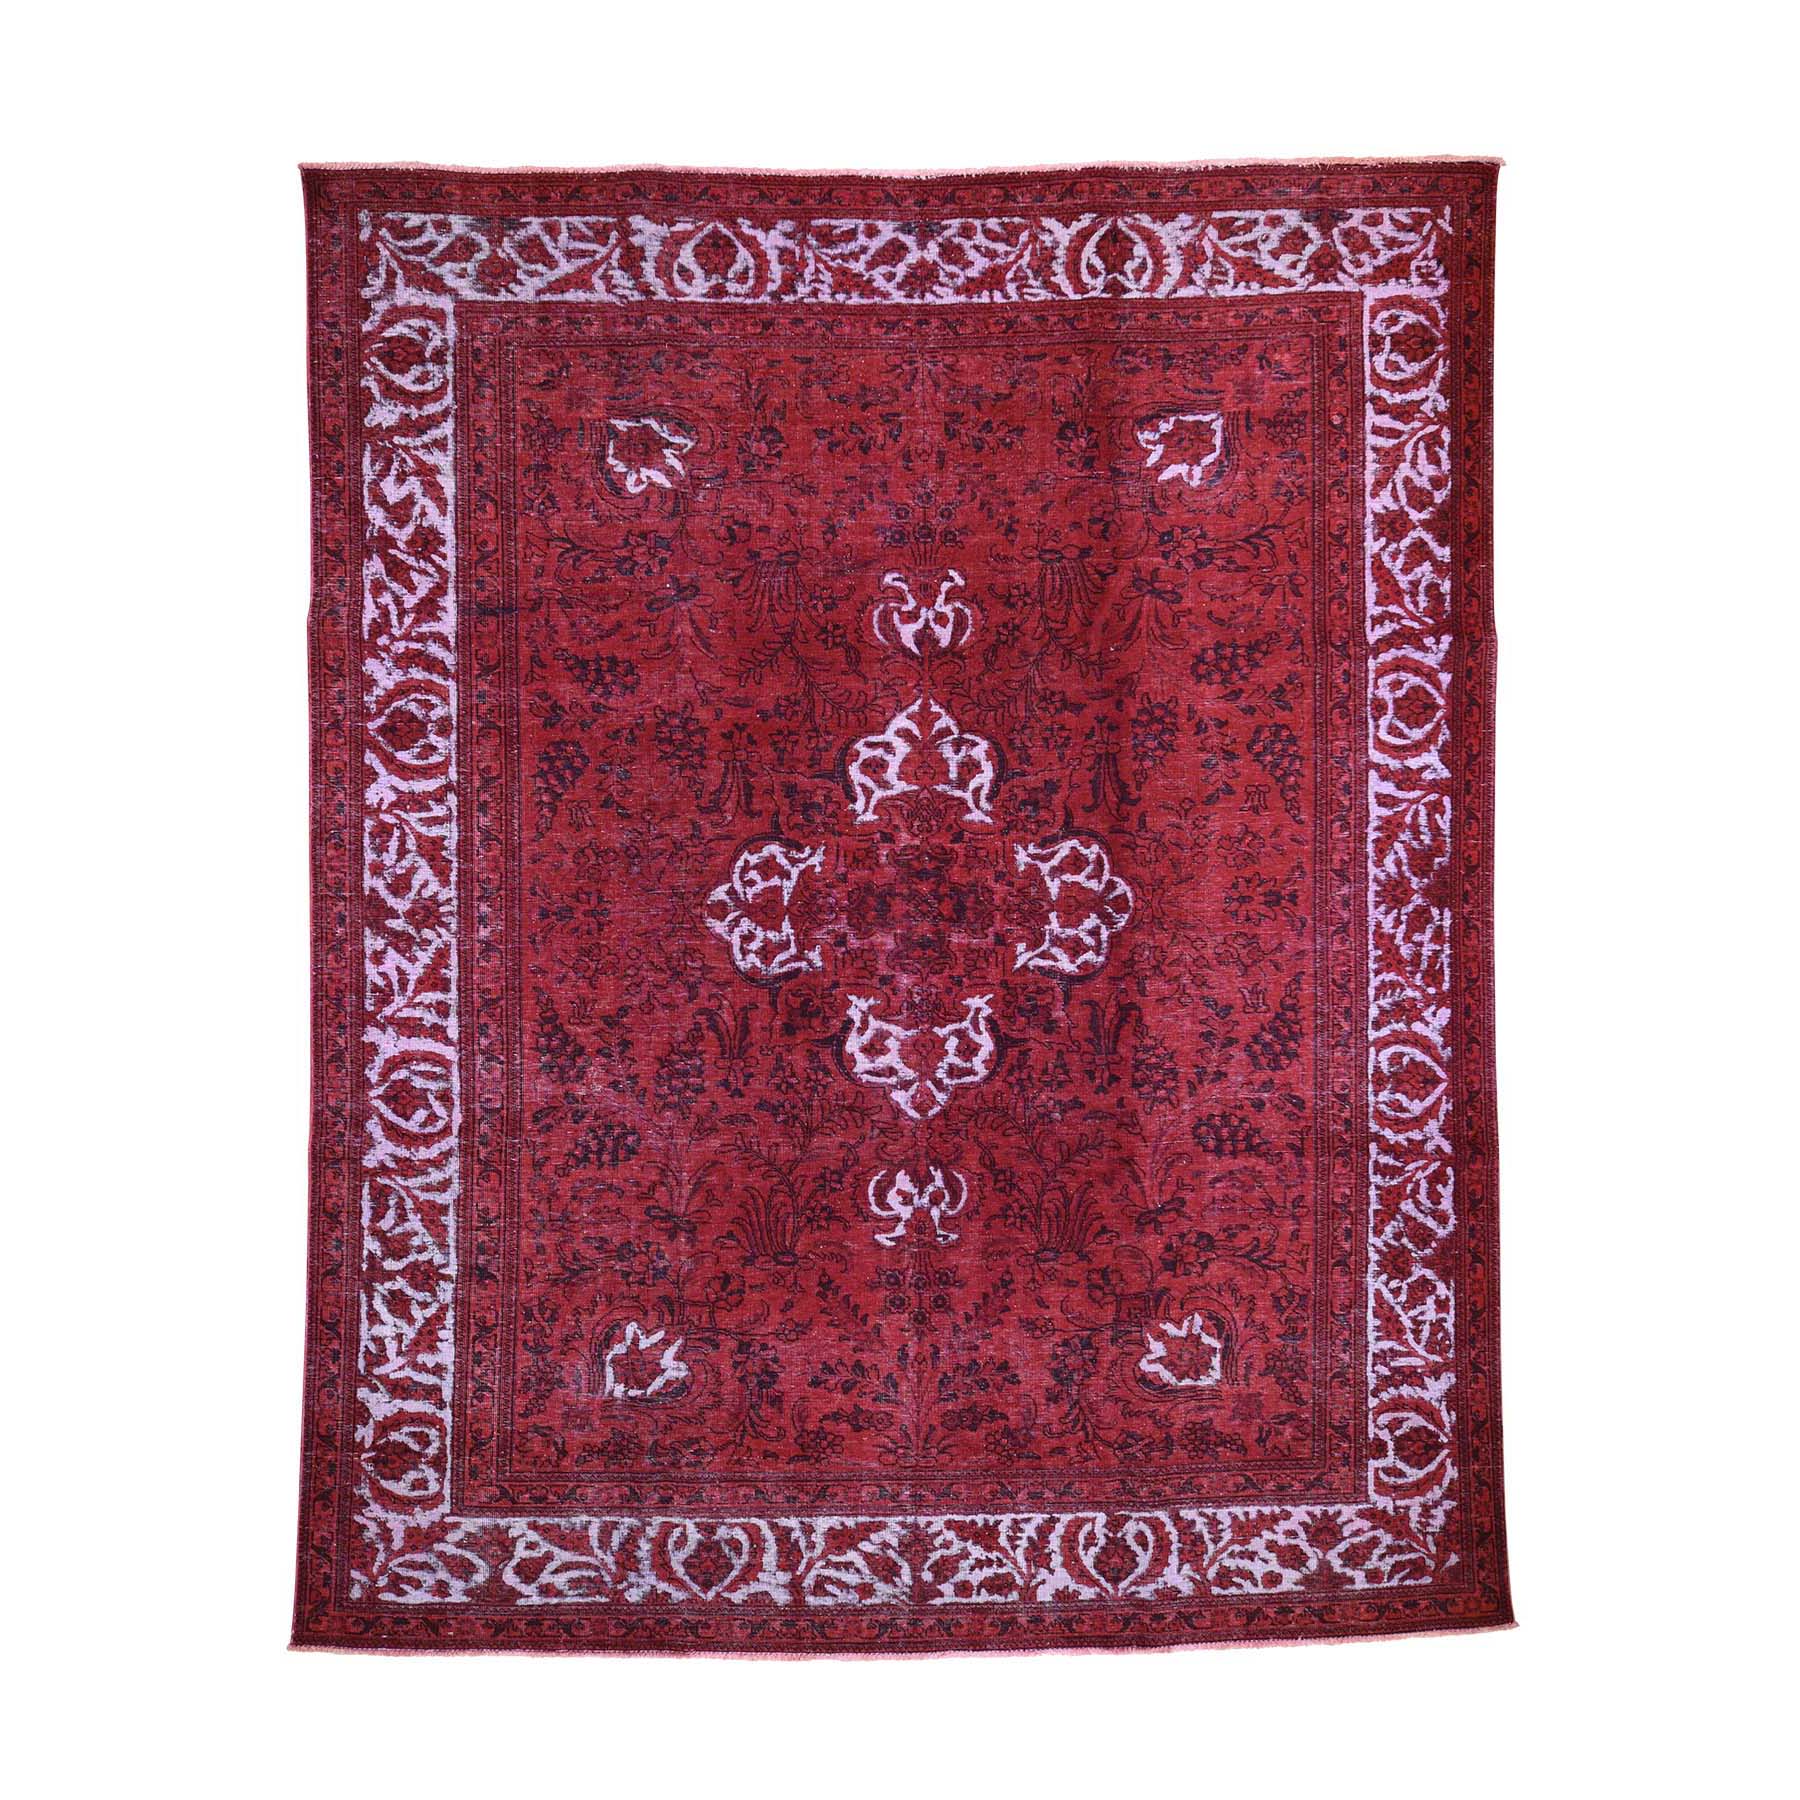 8'7"x10'8" Red Overdyed Pure Wool Persian Tabriz Hi-low Hand Woven Oriental Rug 